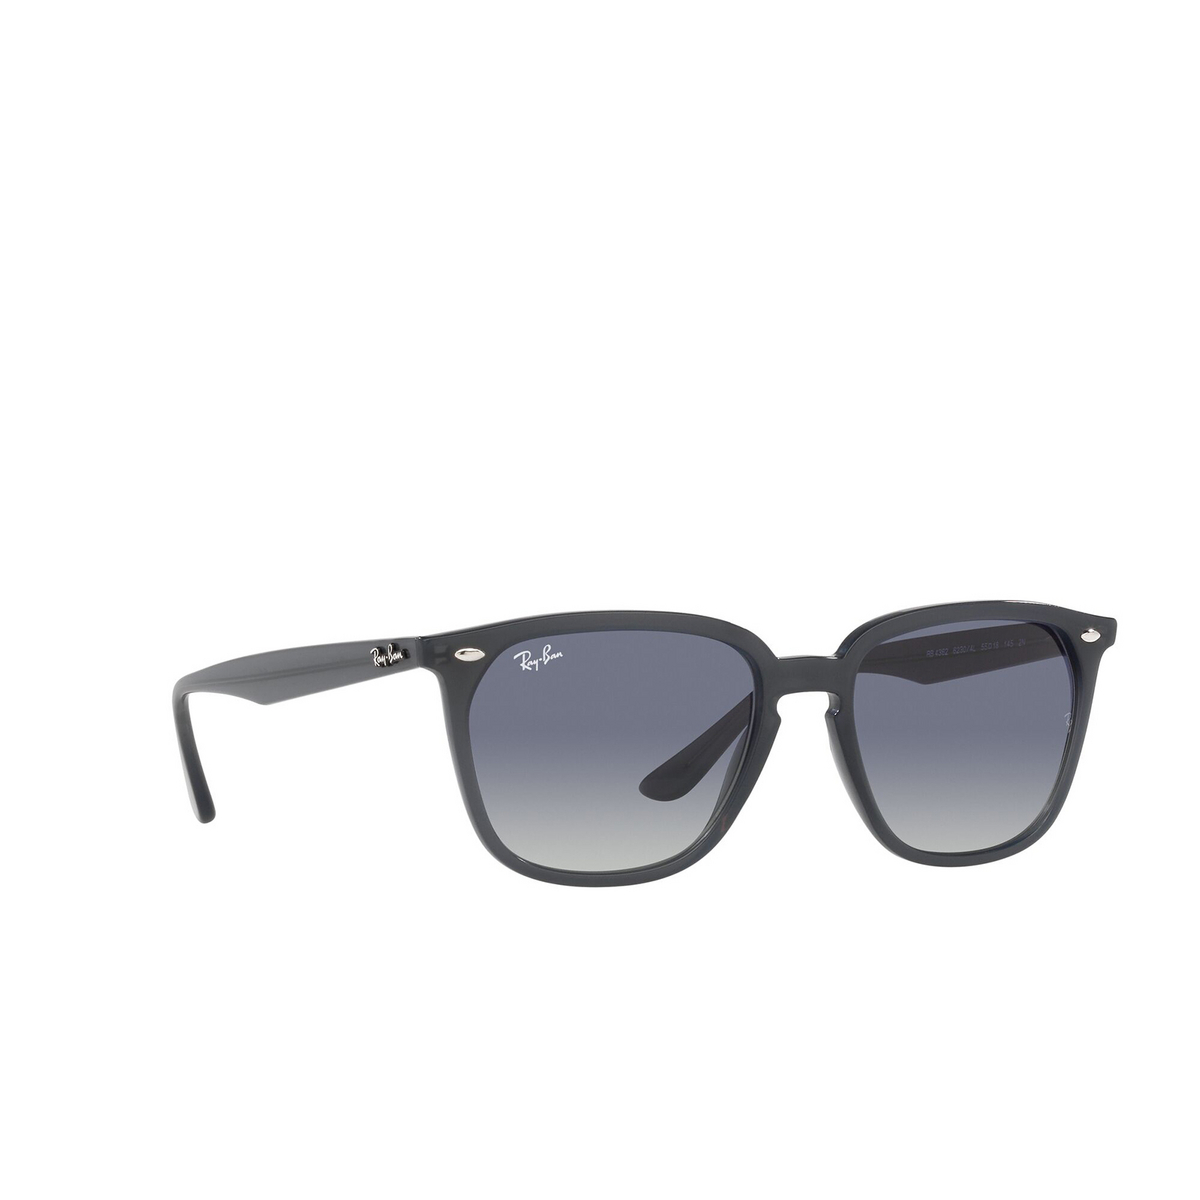 Ray-Ban® Square Sunglasses: RB4362 color Opal Grey 62304L - three-quarters view.